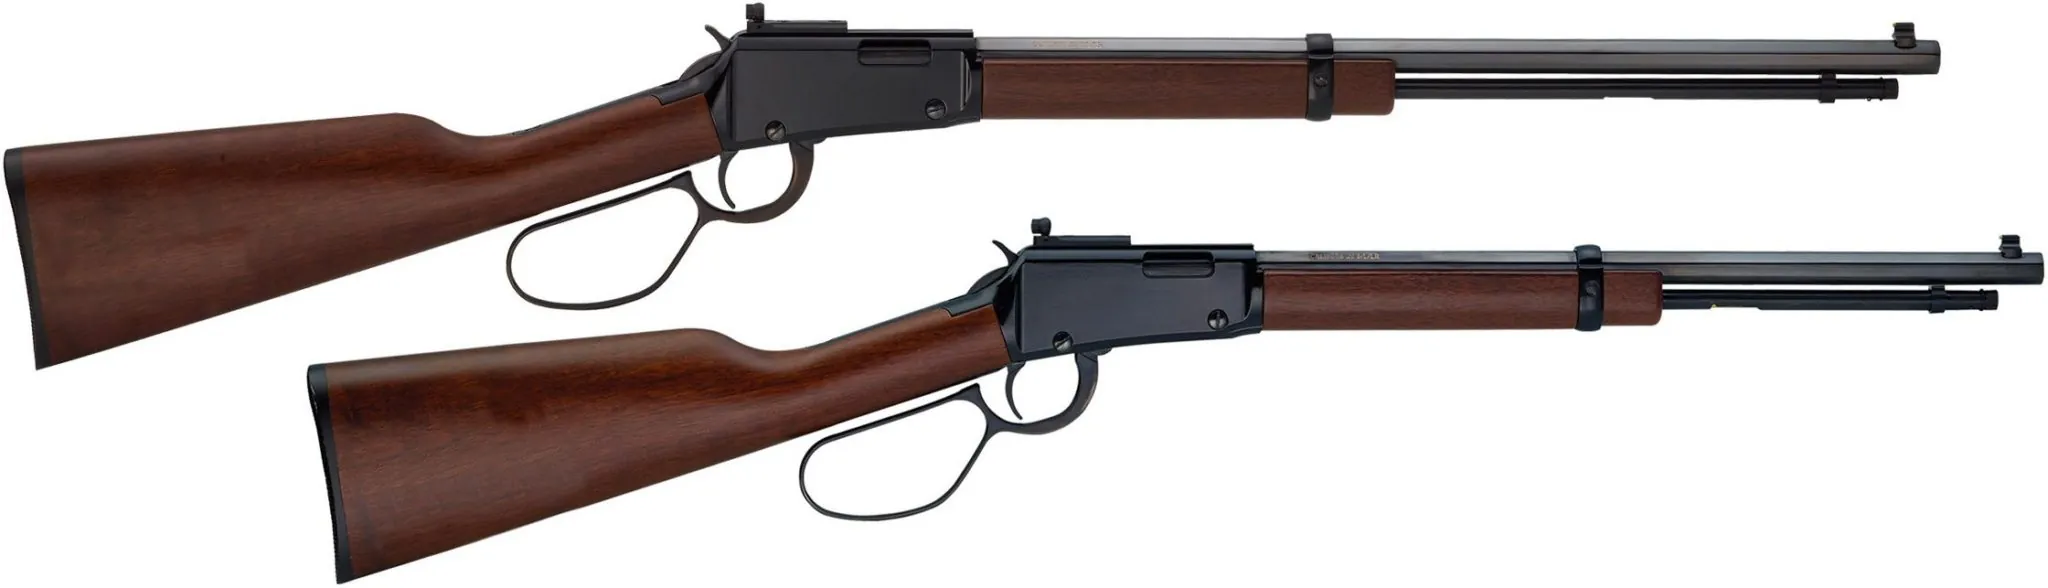 Small Game Rifle & Carbine